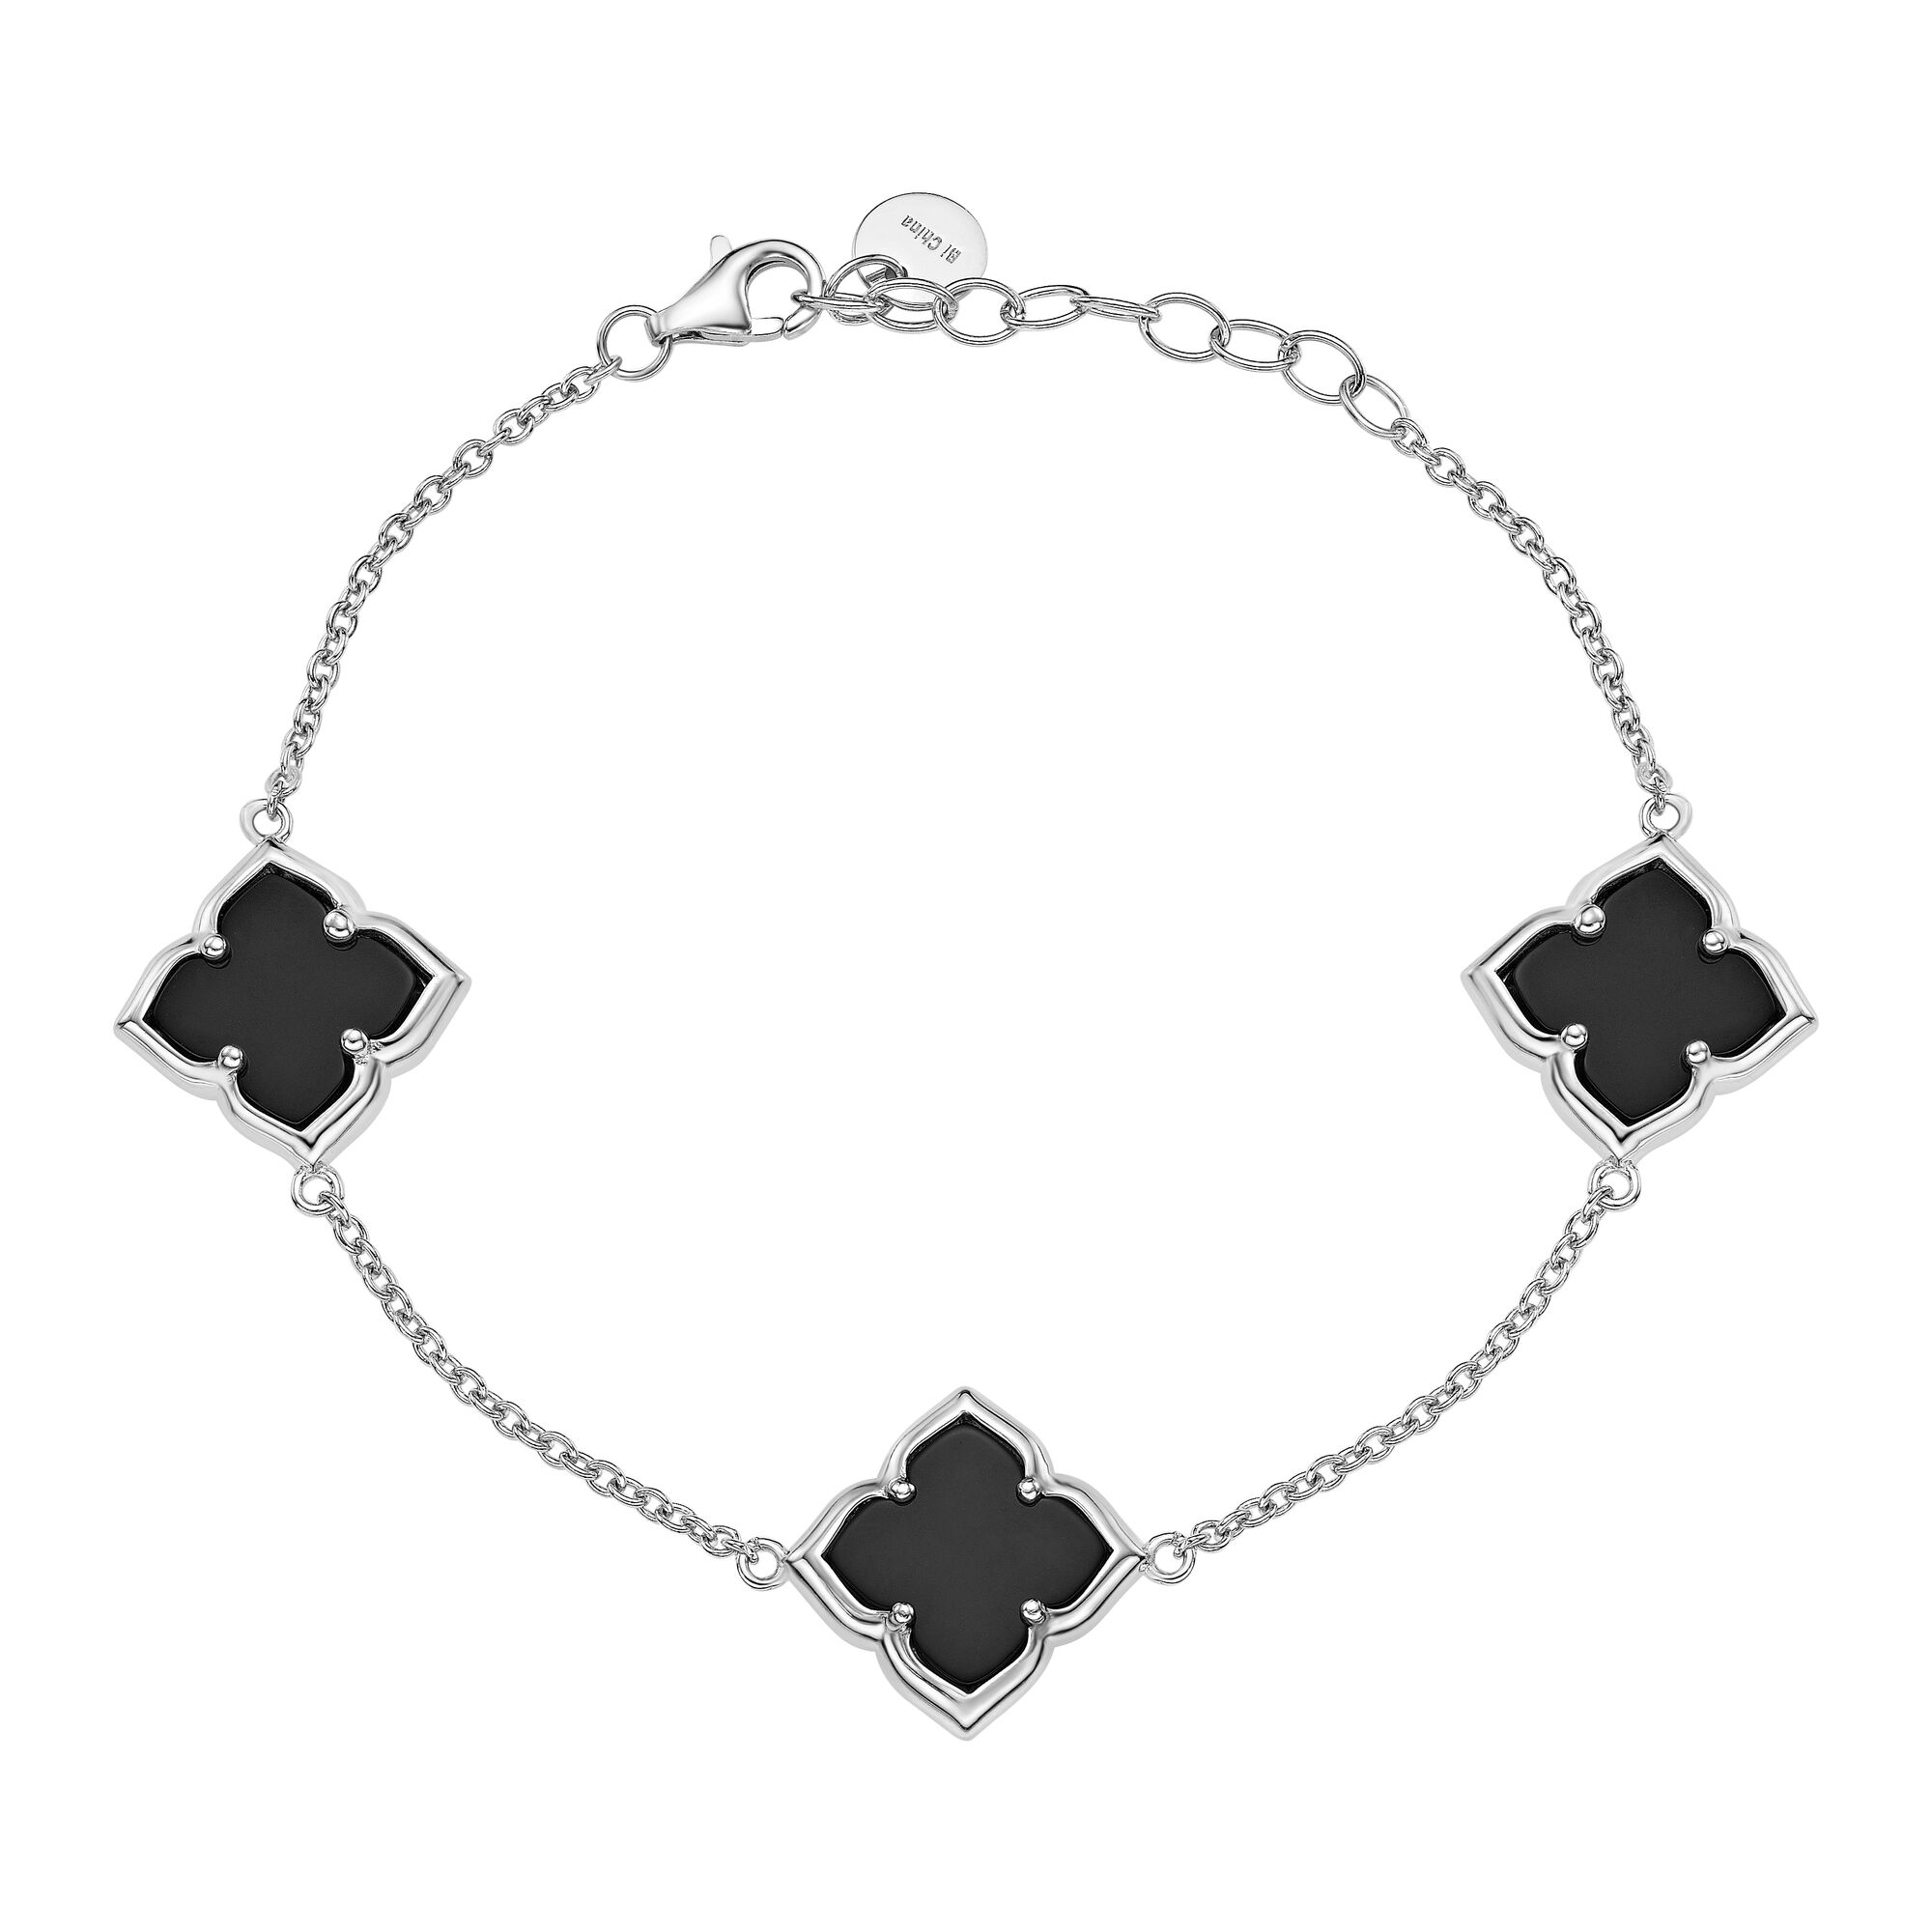 Lavari Jewelers Women’s Black Onyx 3 Clover Bracelet with Lobster Clasp, 925 Sterling Silver, 7-8 Inches